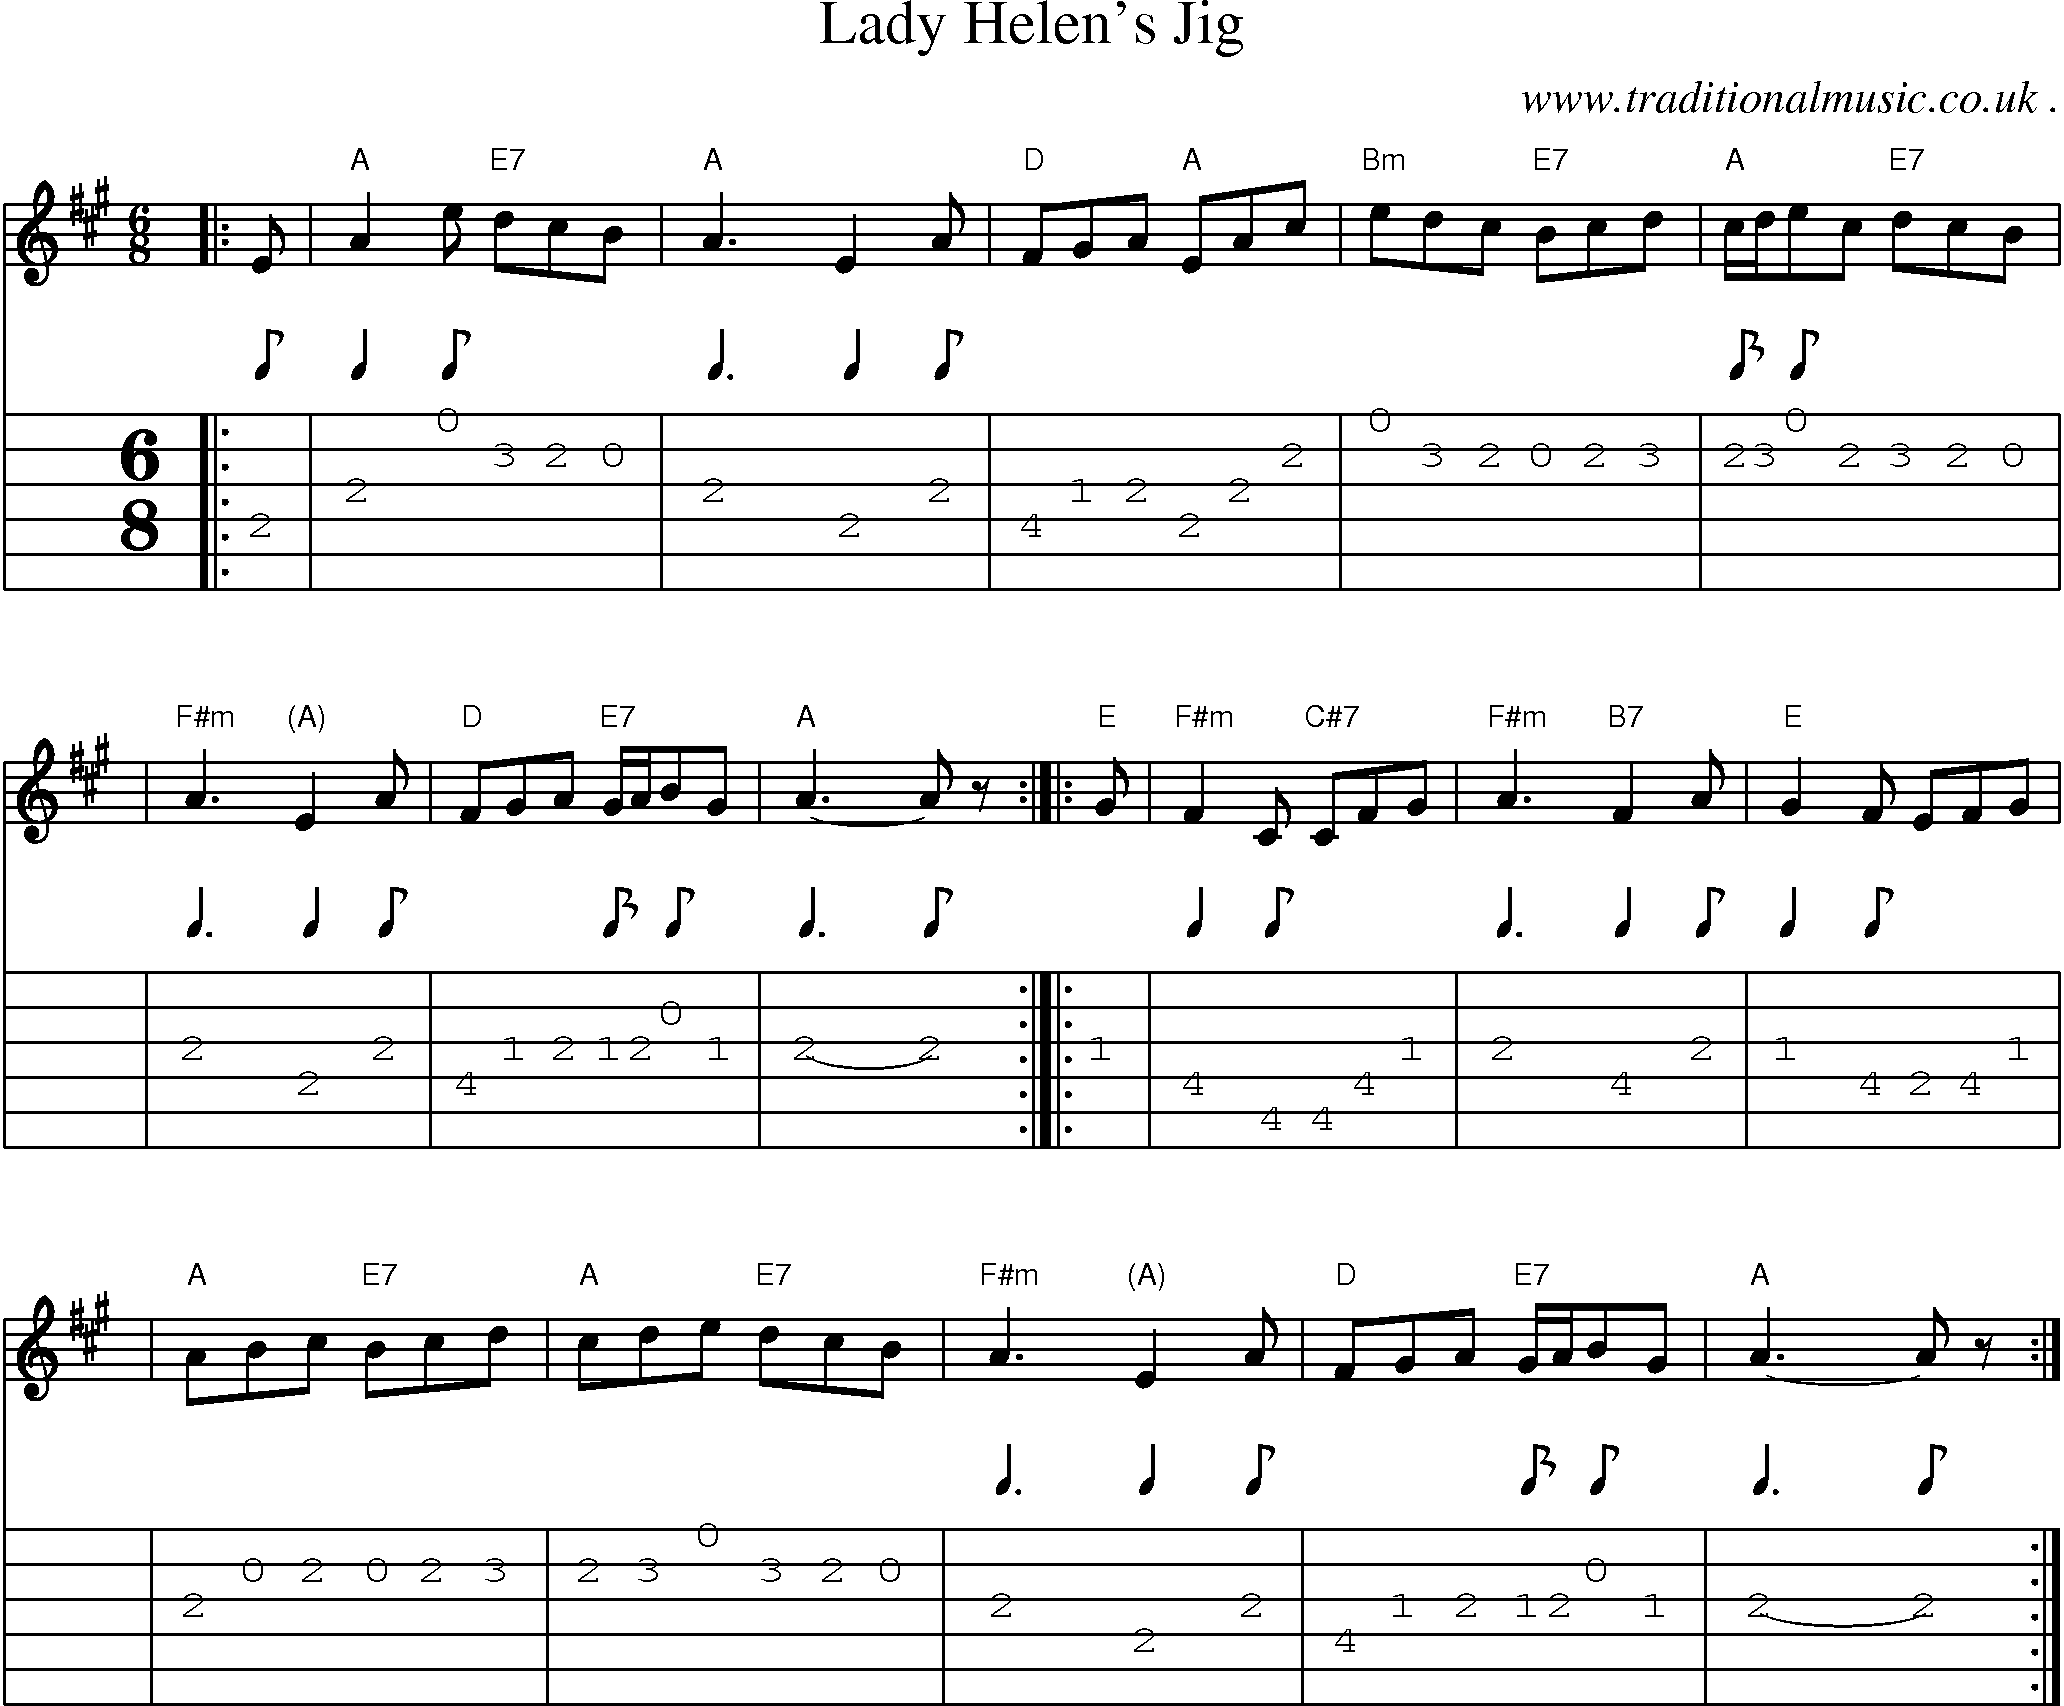 Sheet-music  score, Chords and Guitar Tabs for Lady Helens Jig